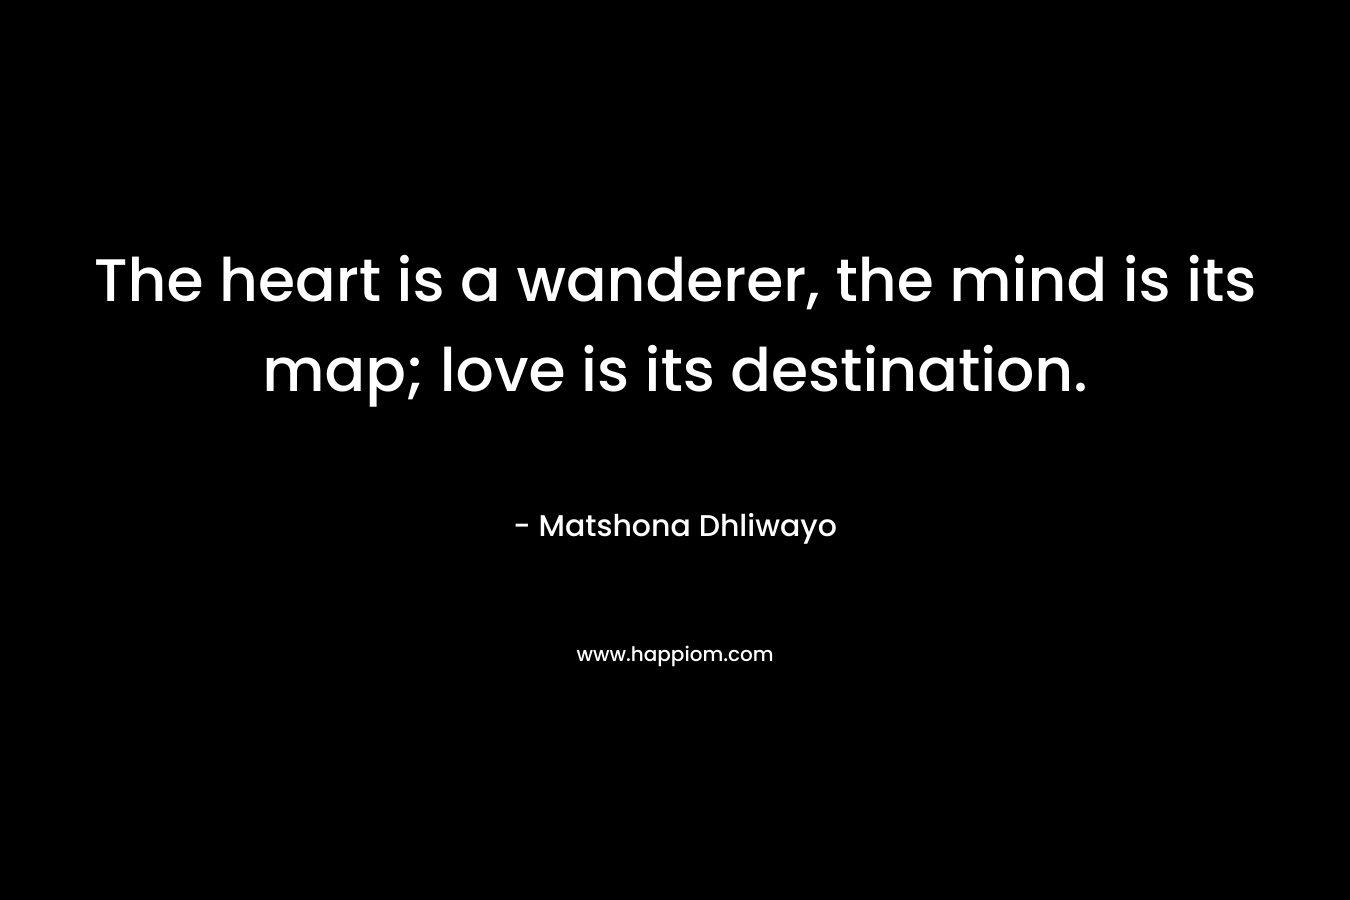 The heart is a wanderer, the mind is its map; love is its destination.